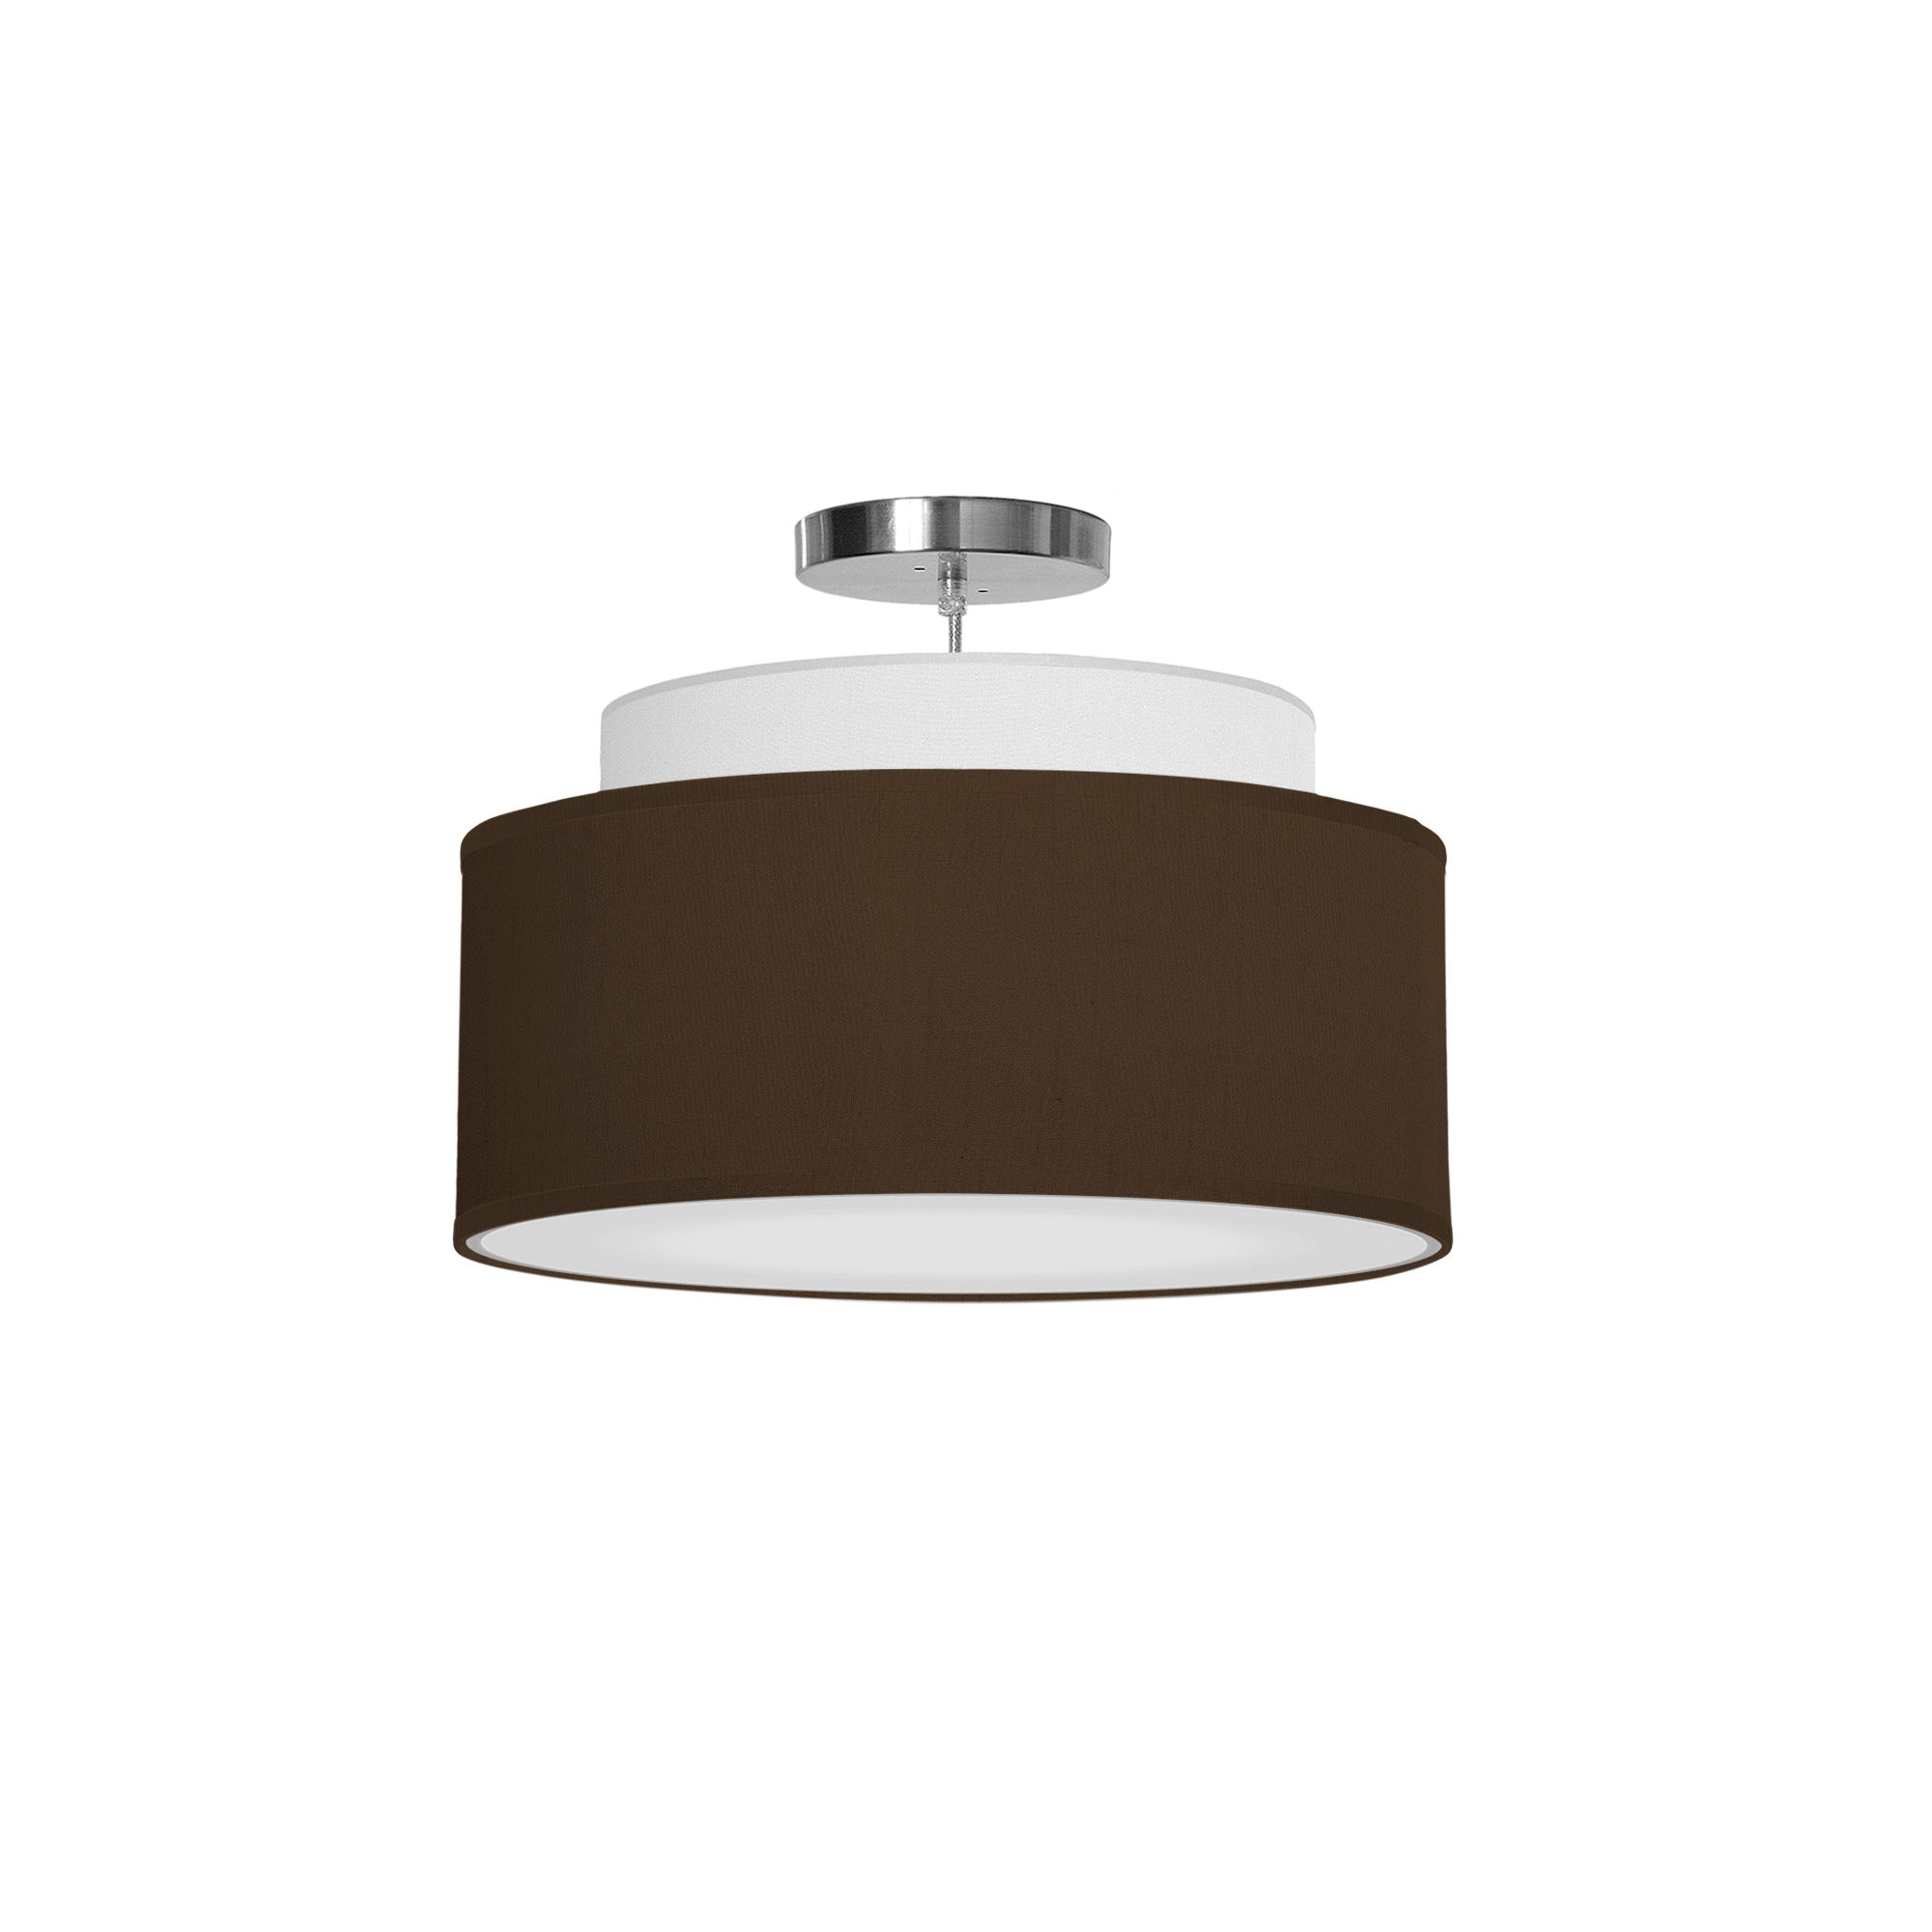 The Elsa Hanging Lamp from Seascape Fixtures with a silk shade in chocolate color.